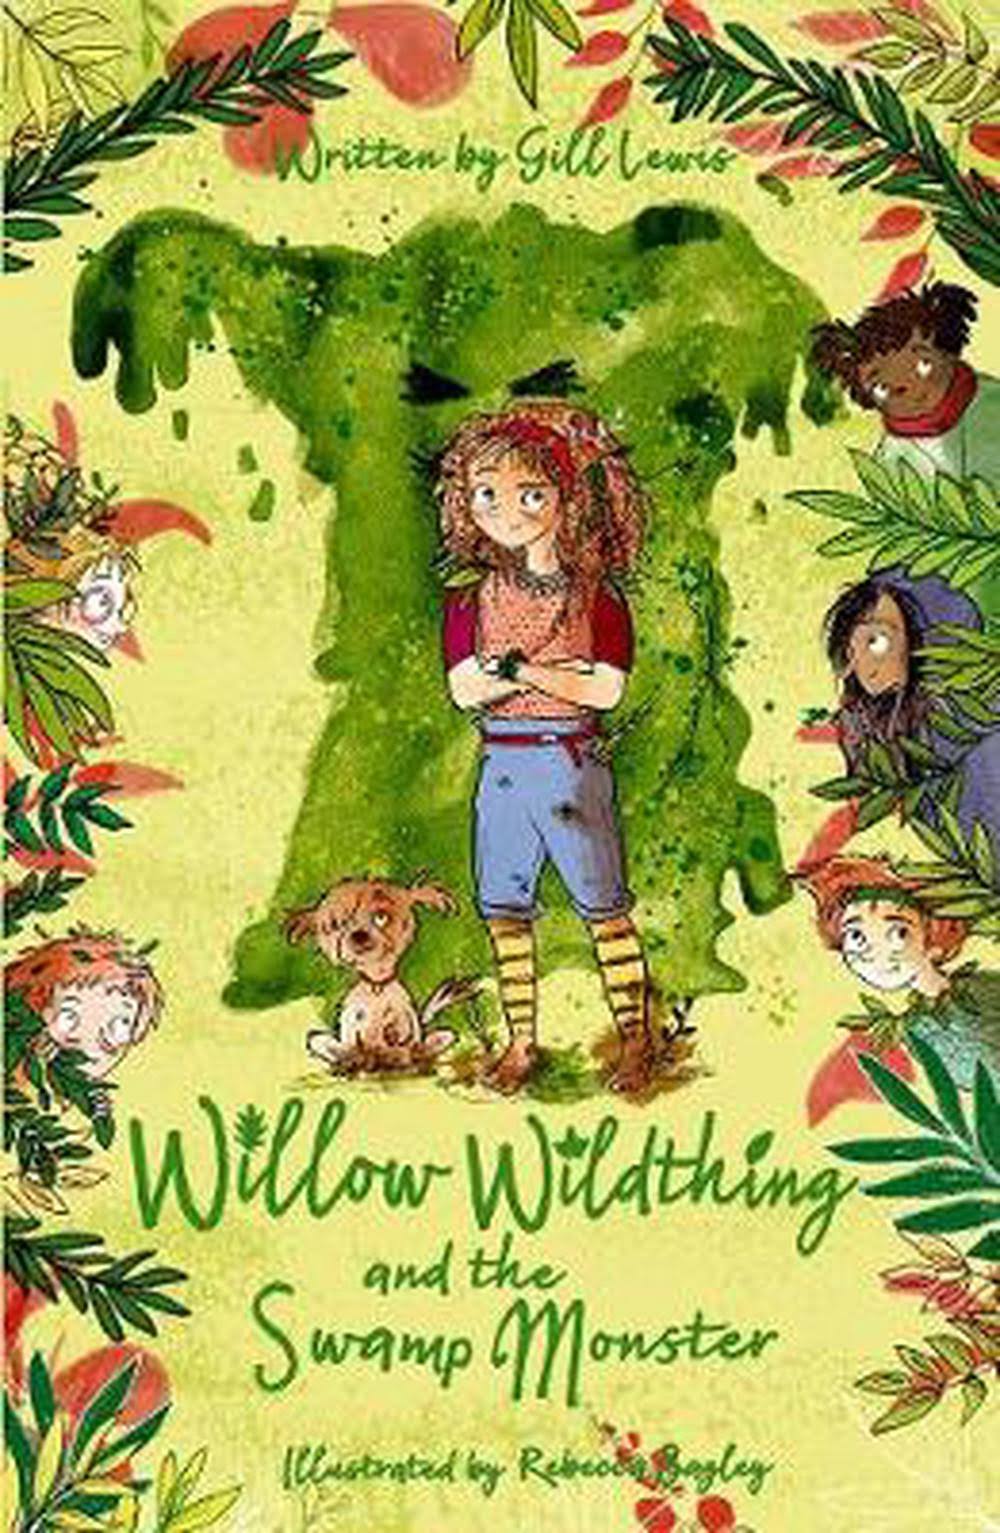 Willow Wildthing and the Swamp Monster [Book]